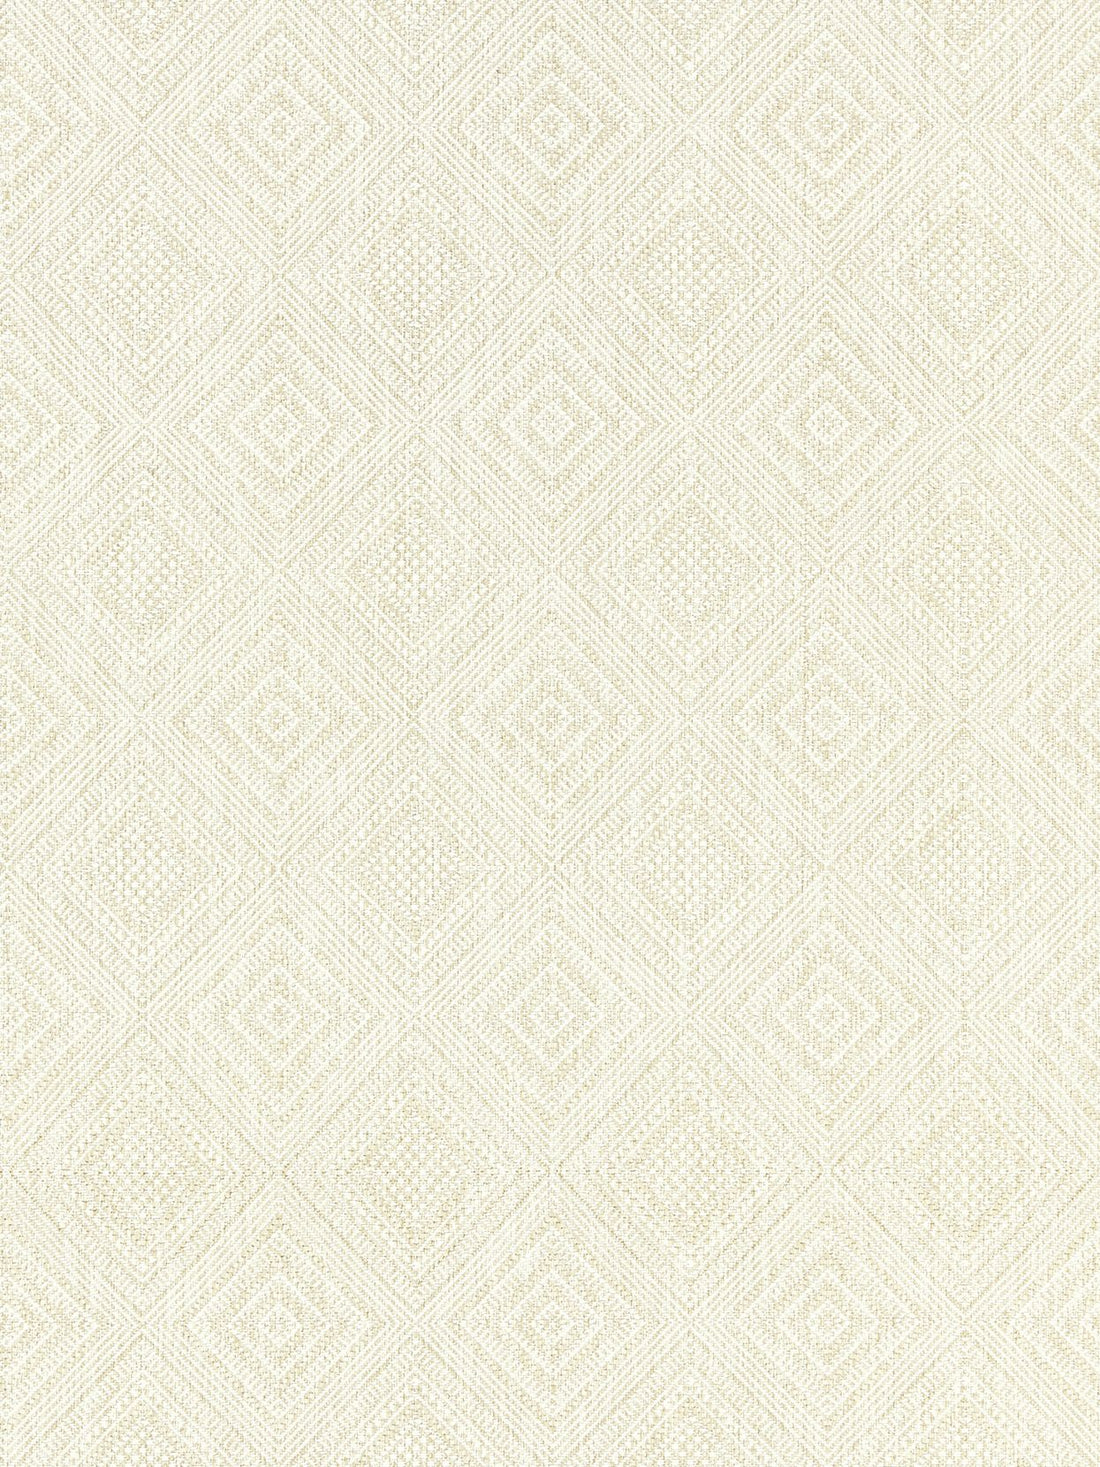 Antigua Weave fabric in alabaster color - pattern number SC 000127197 - by Scalamandre in the Scalamandre Fabrics Book 1 collection